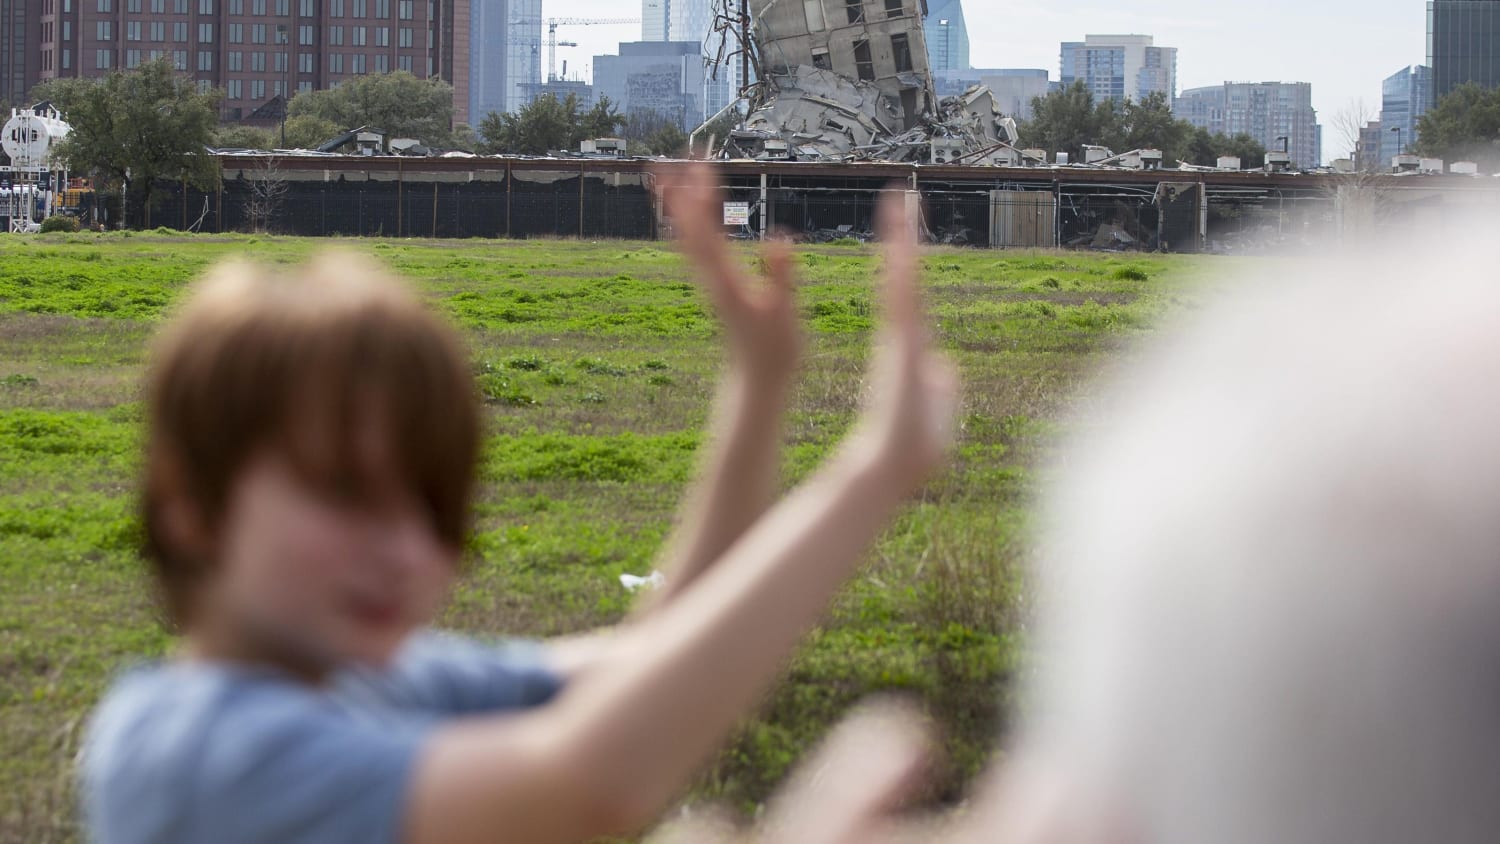 Leaning Tower of Dallas survived demolition to become city's accidental Instagram star